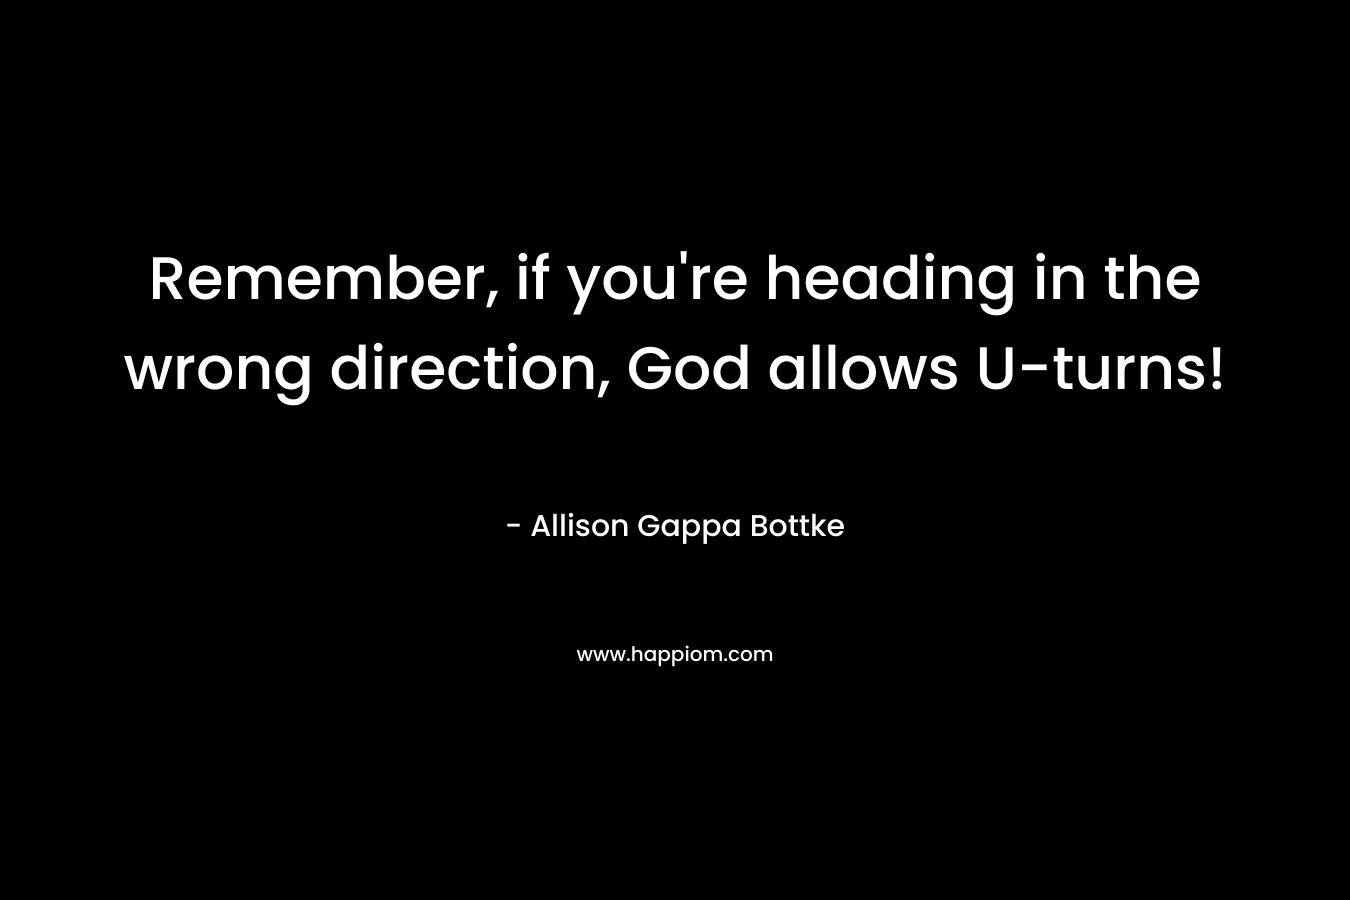 Remember, if you’re heading in the wrong direction, God allows U-turns! – Allison Gappa Bottke